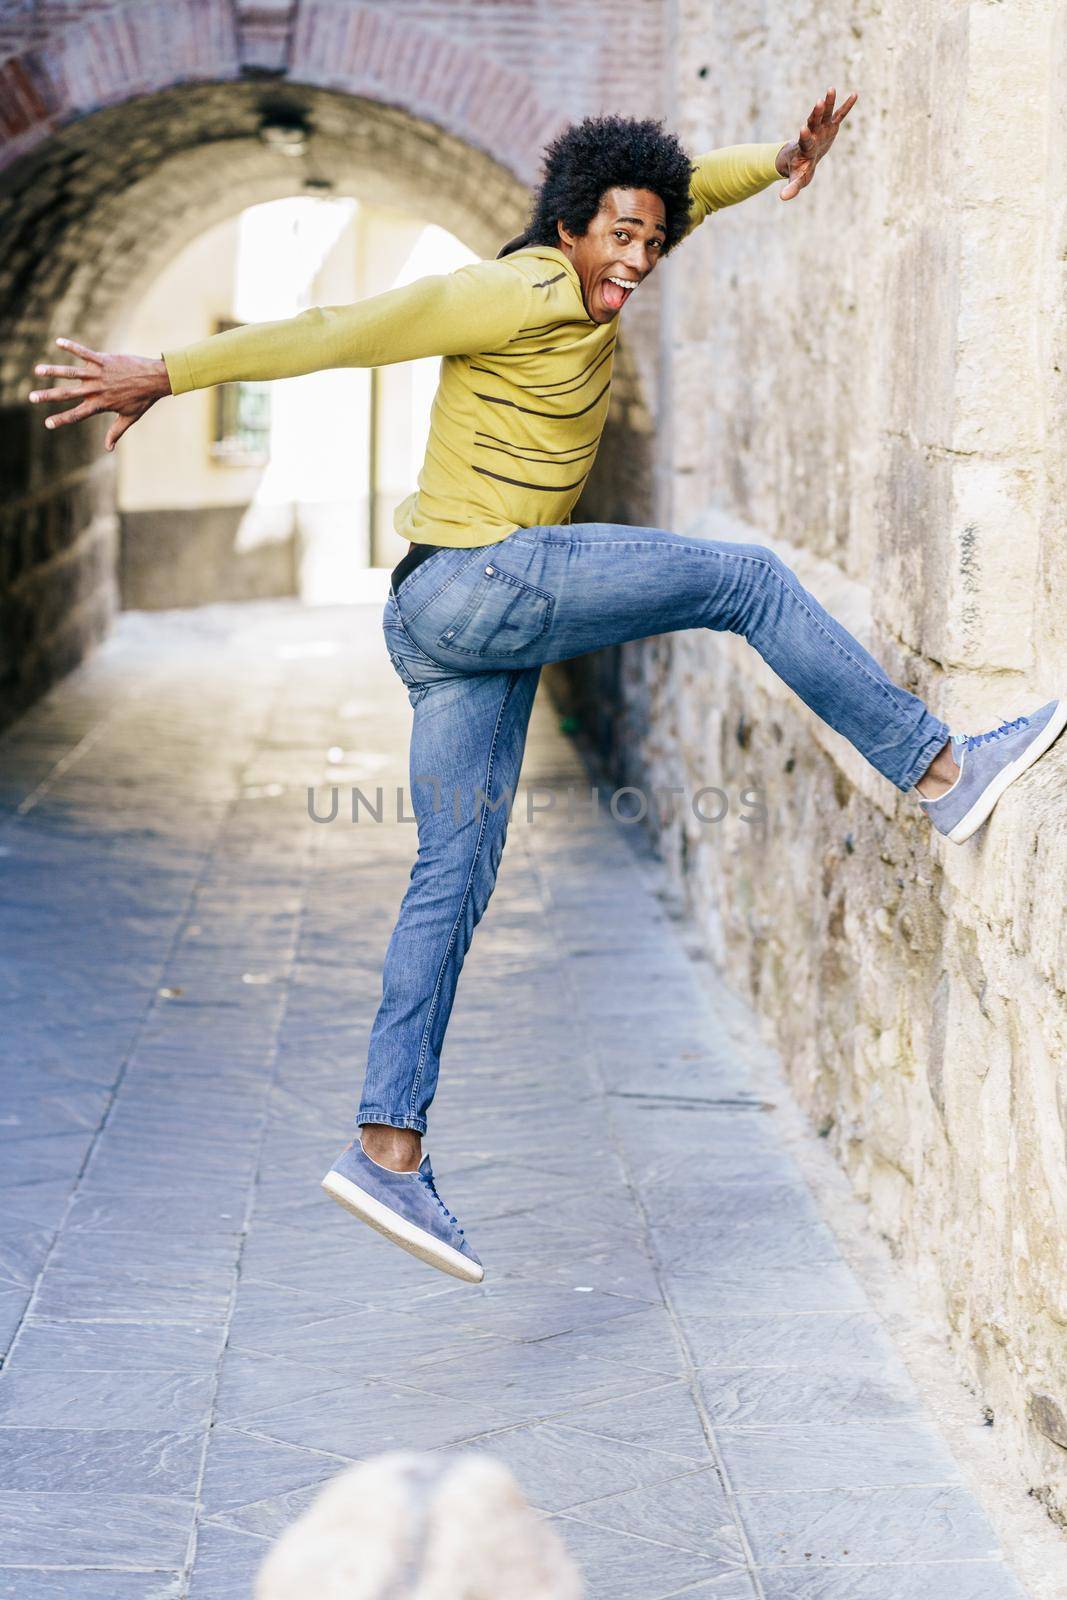 Black man with afro hair jumping for joy by javiindy